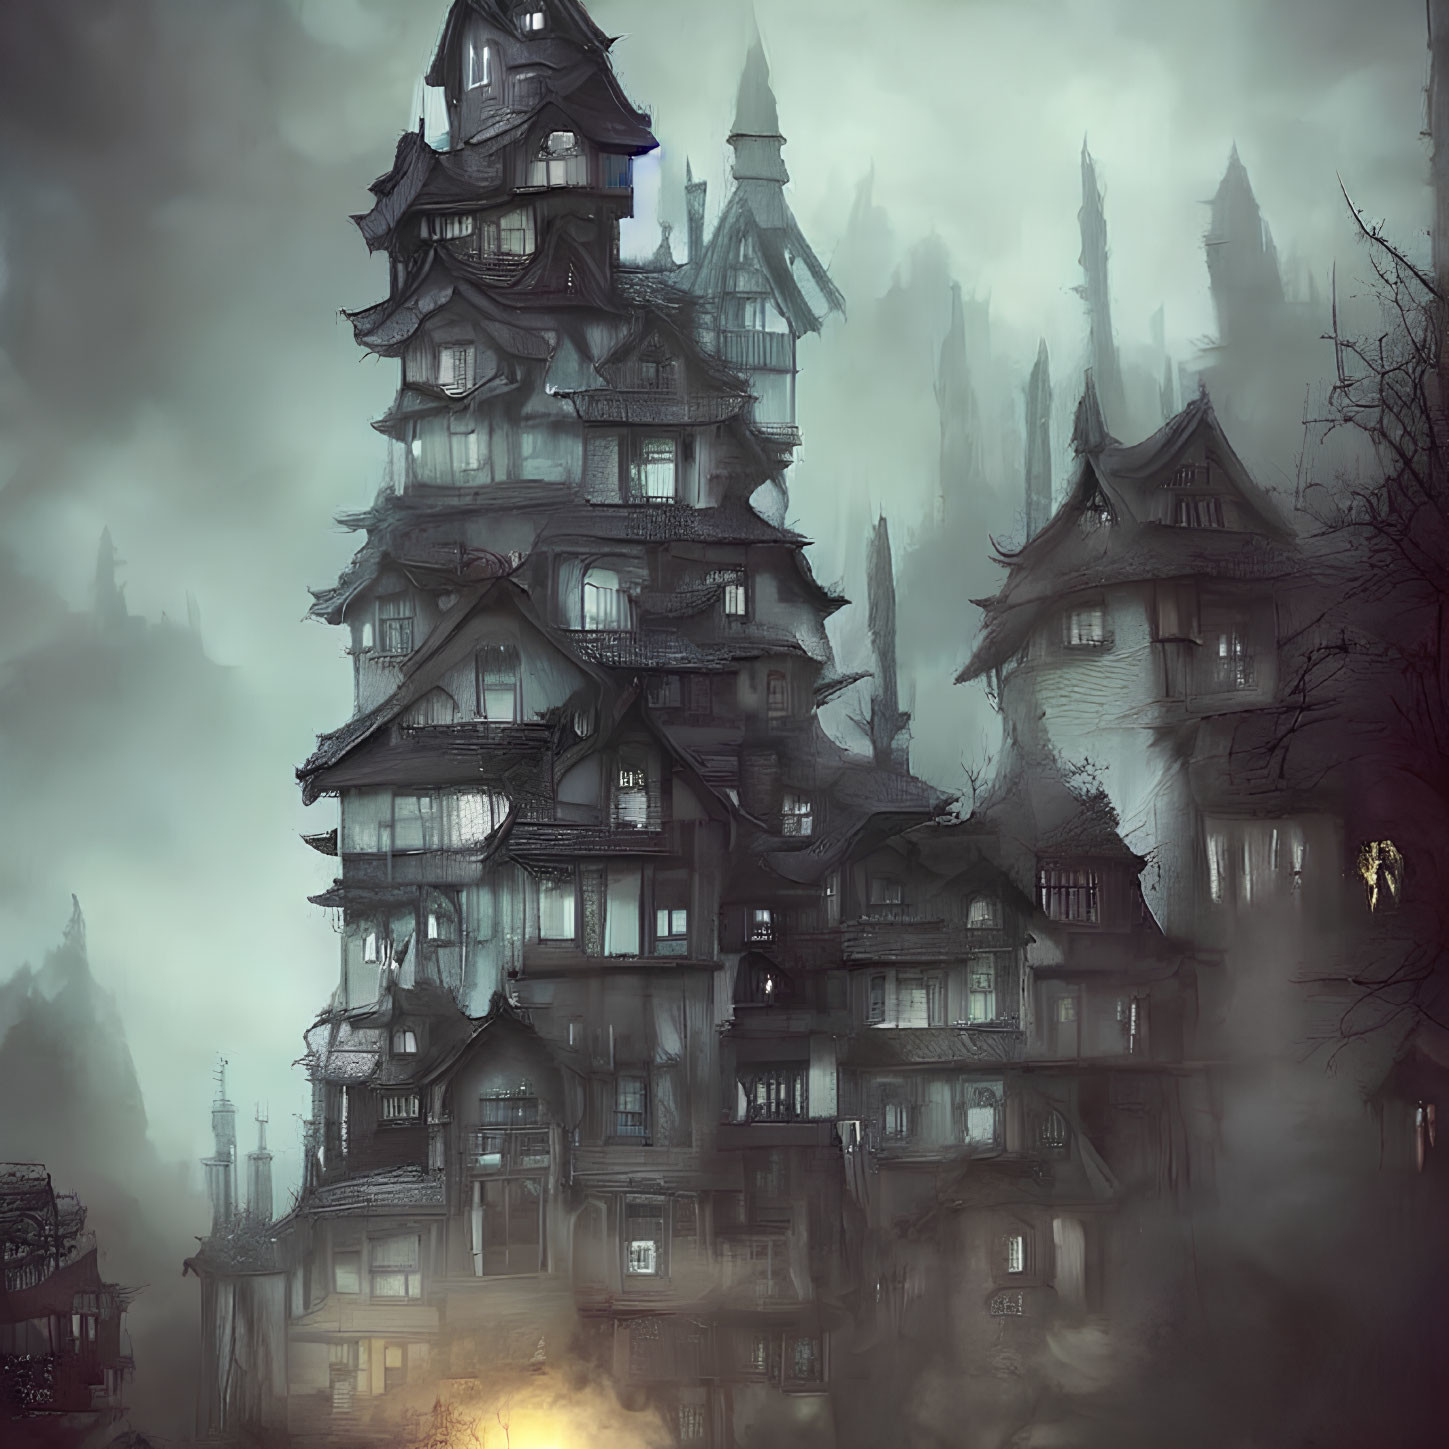 Enigmatic mist-covered fantasy pagoda with glowing window